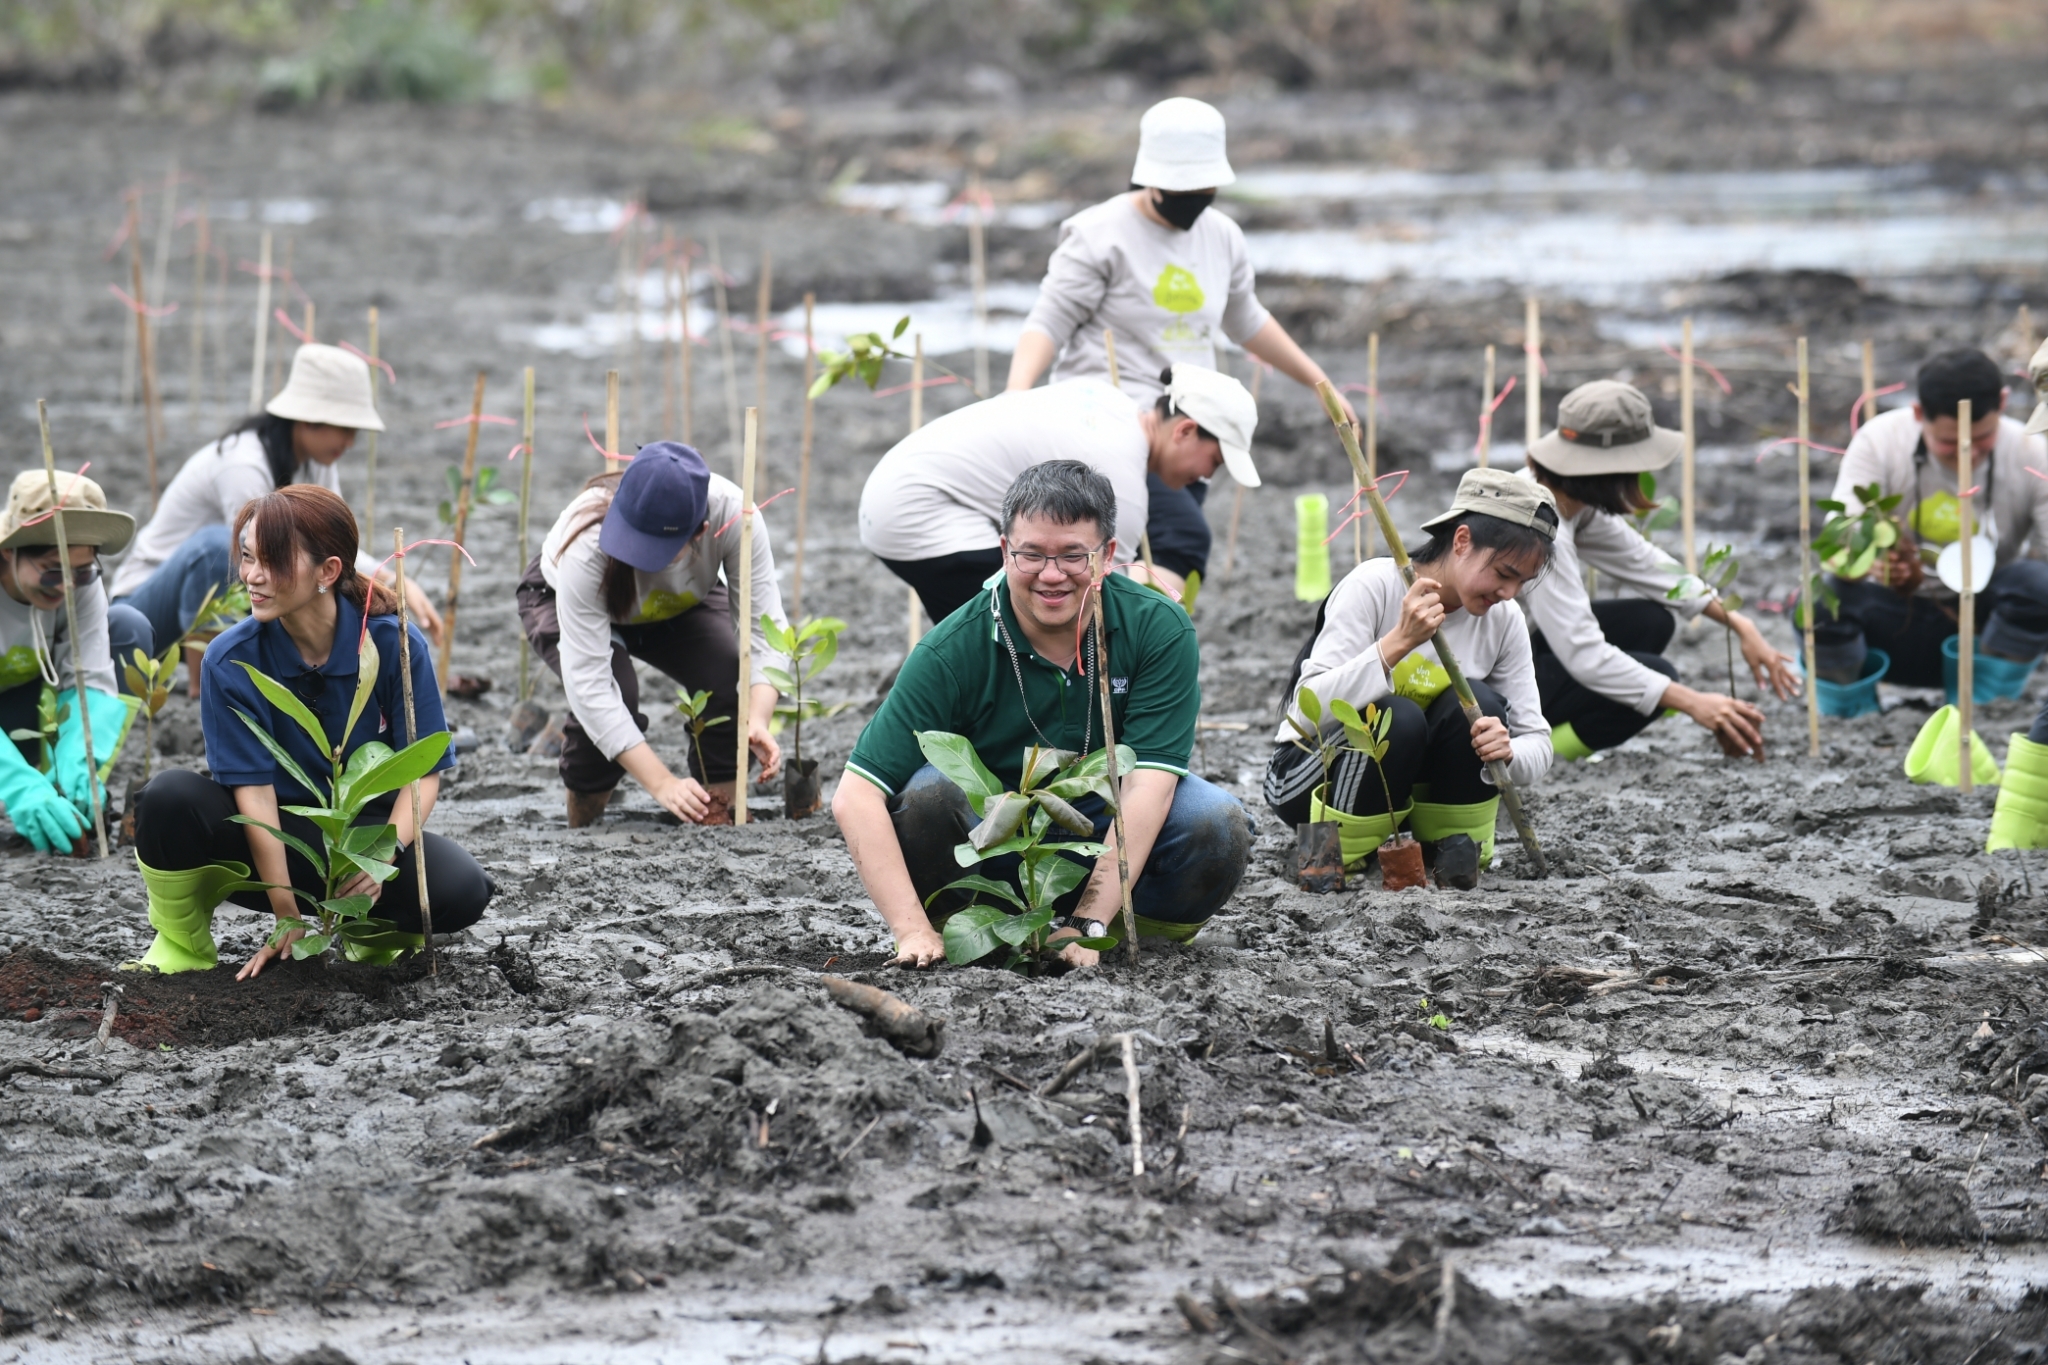 CP Foods Pledges to Protect Biodiversity by Planting 5 million Trees across Its Operation Sites Worldwide